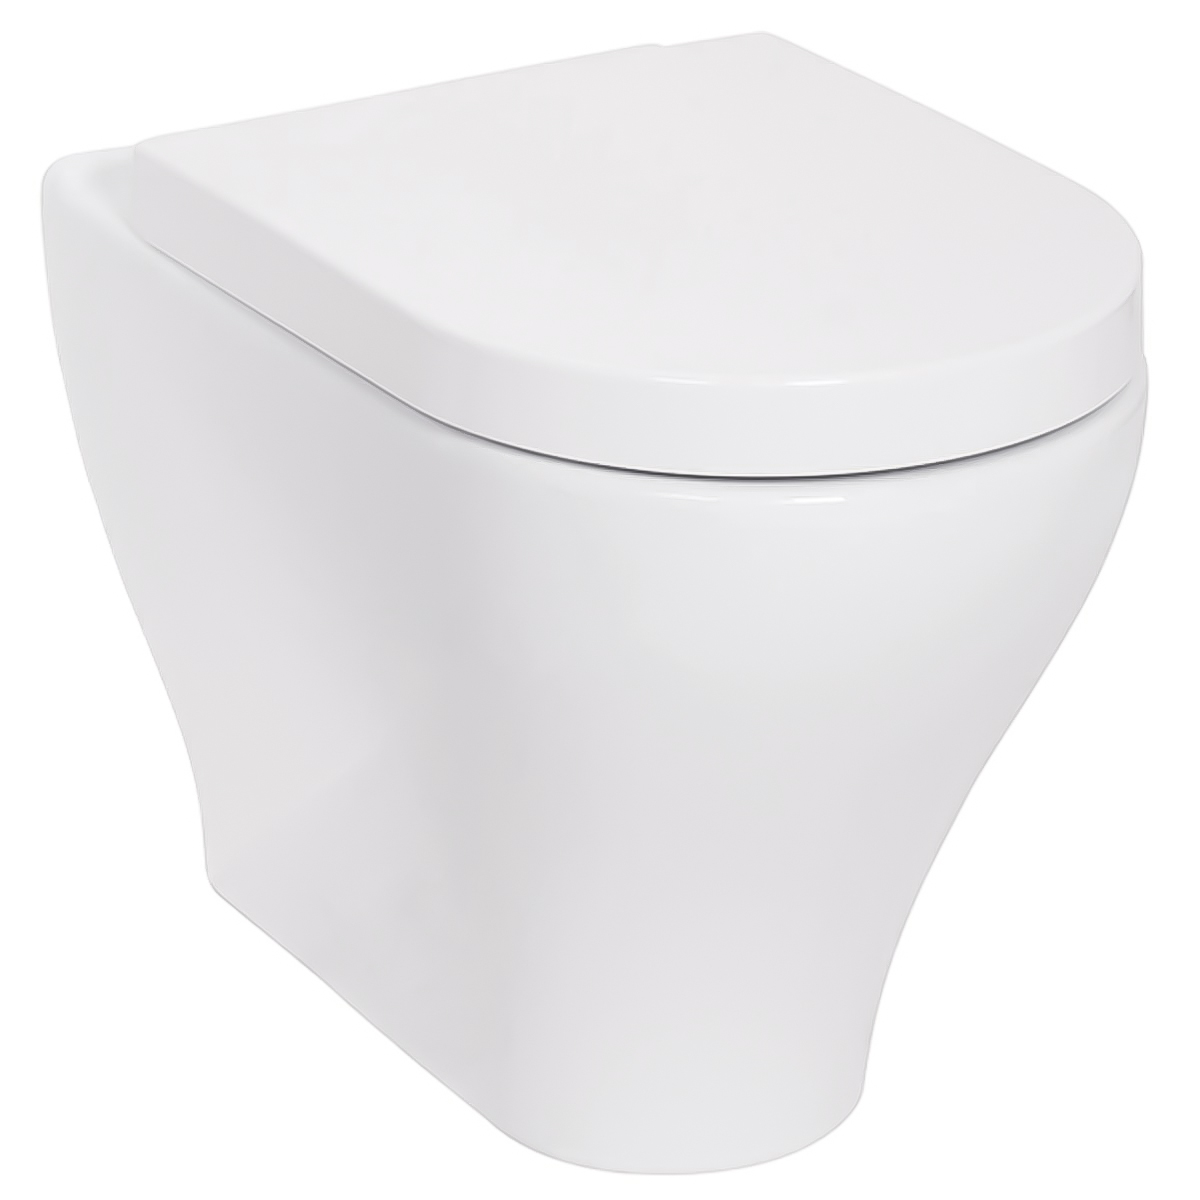 BTW Back To Wall Toilet Pan Concealed Cistern Unit Soft Close Seat Gloss White eBay